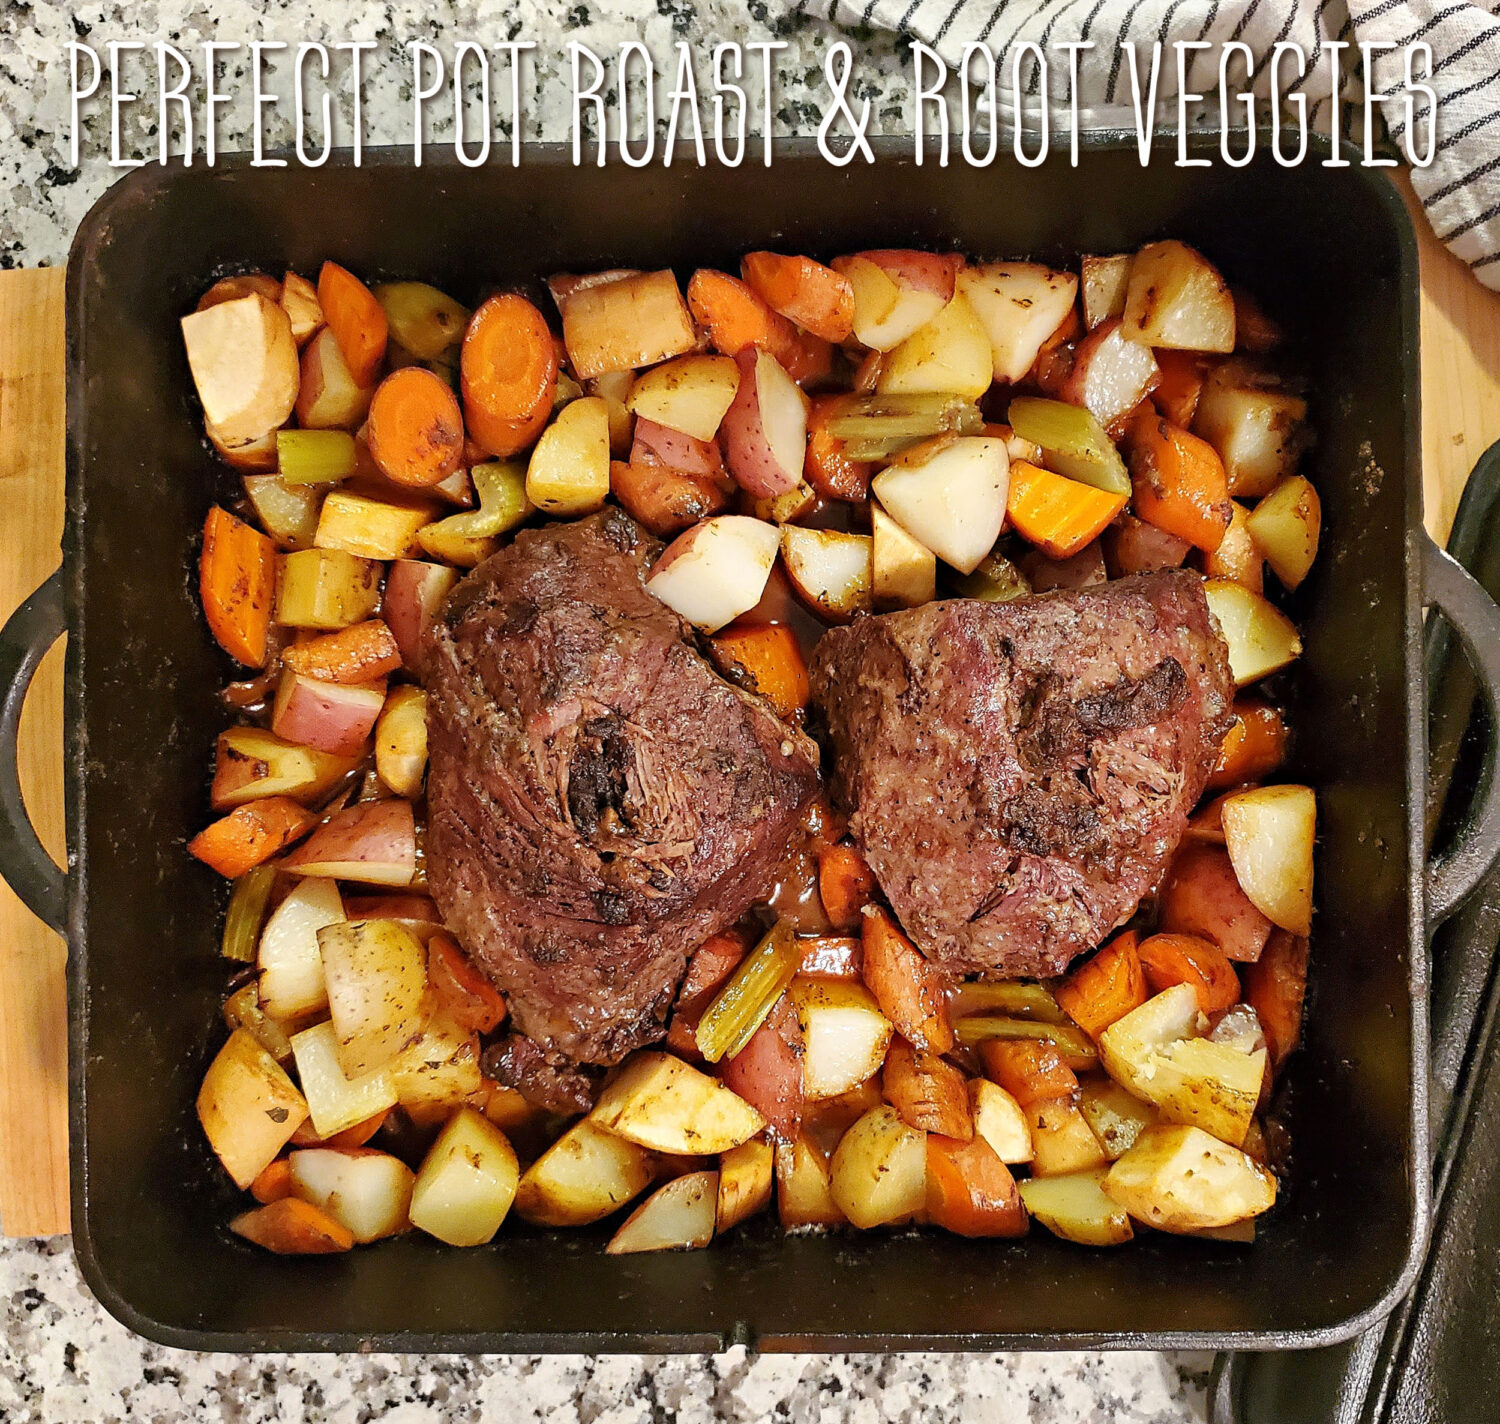 Perfect Pot Roast & Root Veggies: Yukon Gold, Parsnips, Carrots, and Sweet Onions baked with herbs & red wine for an earthy homemade gravy.